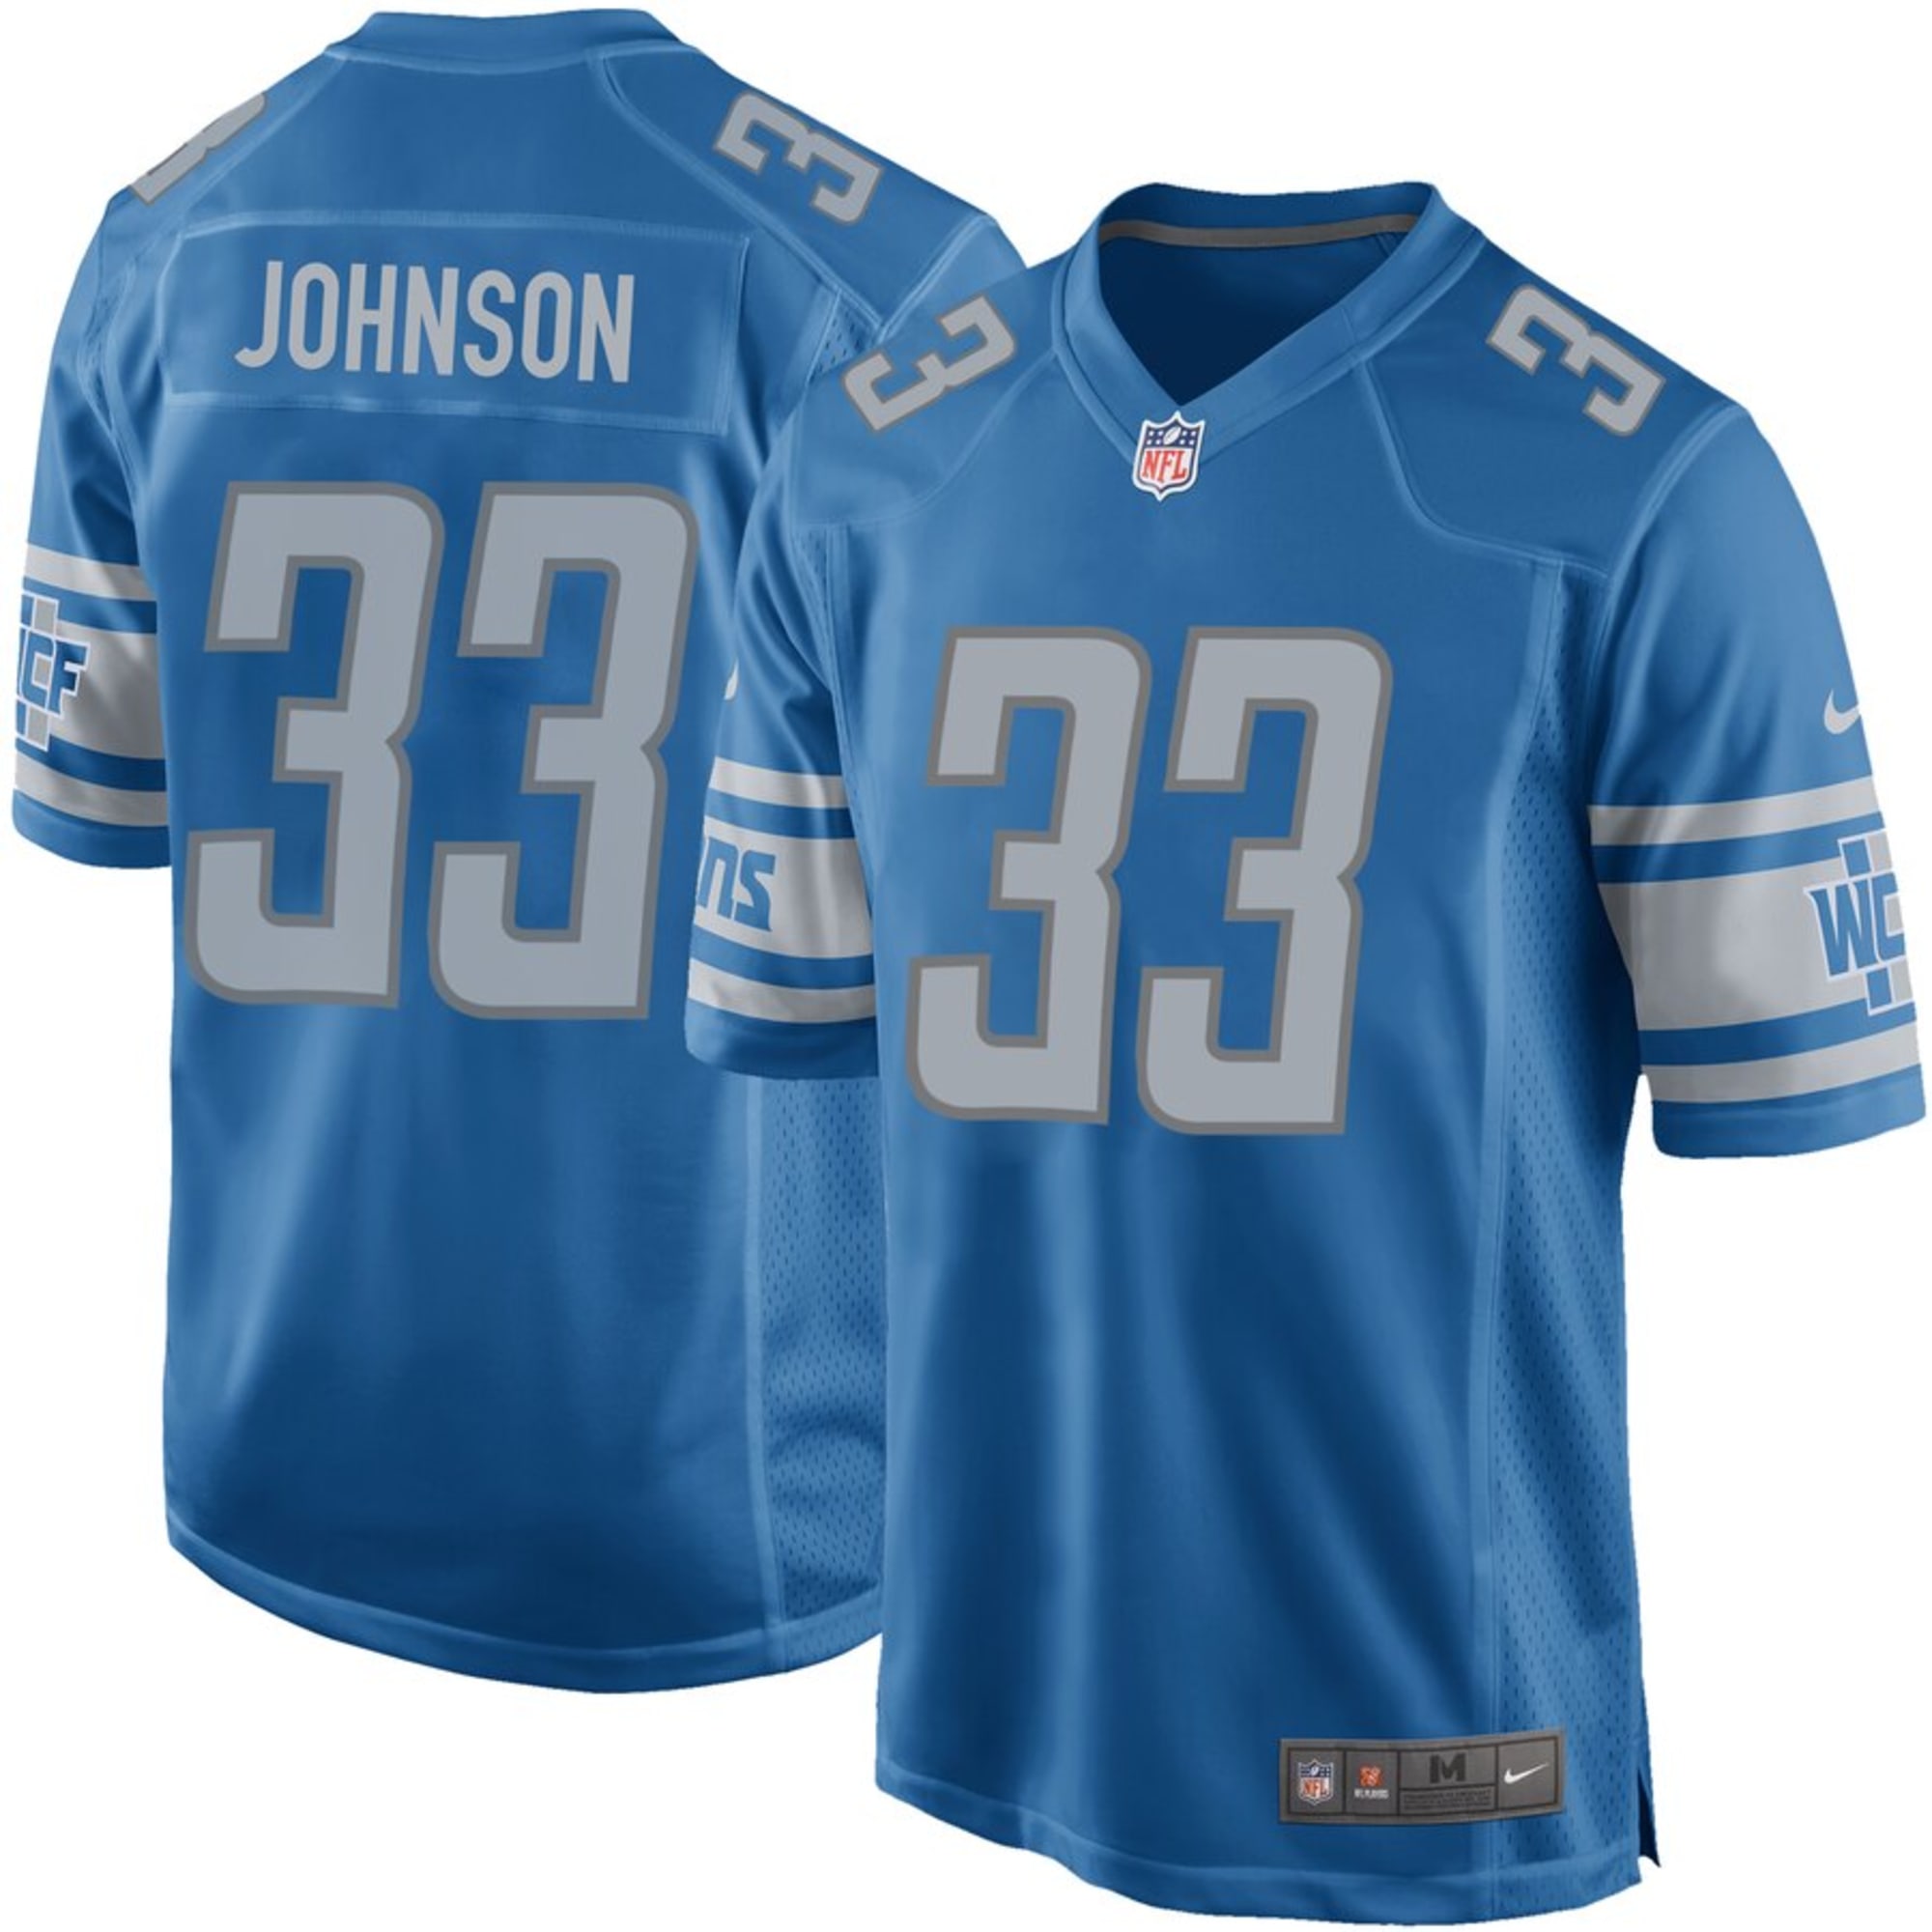 Detroit Lions NFL Kickoff Must Haves